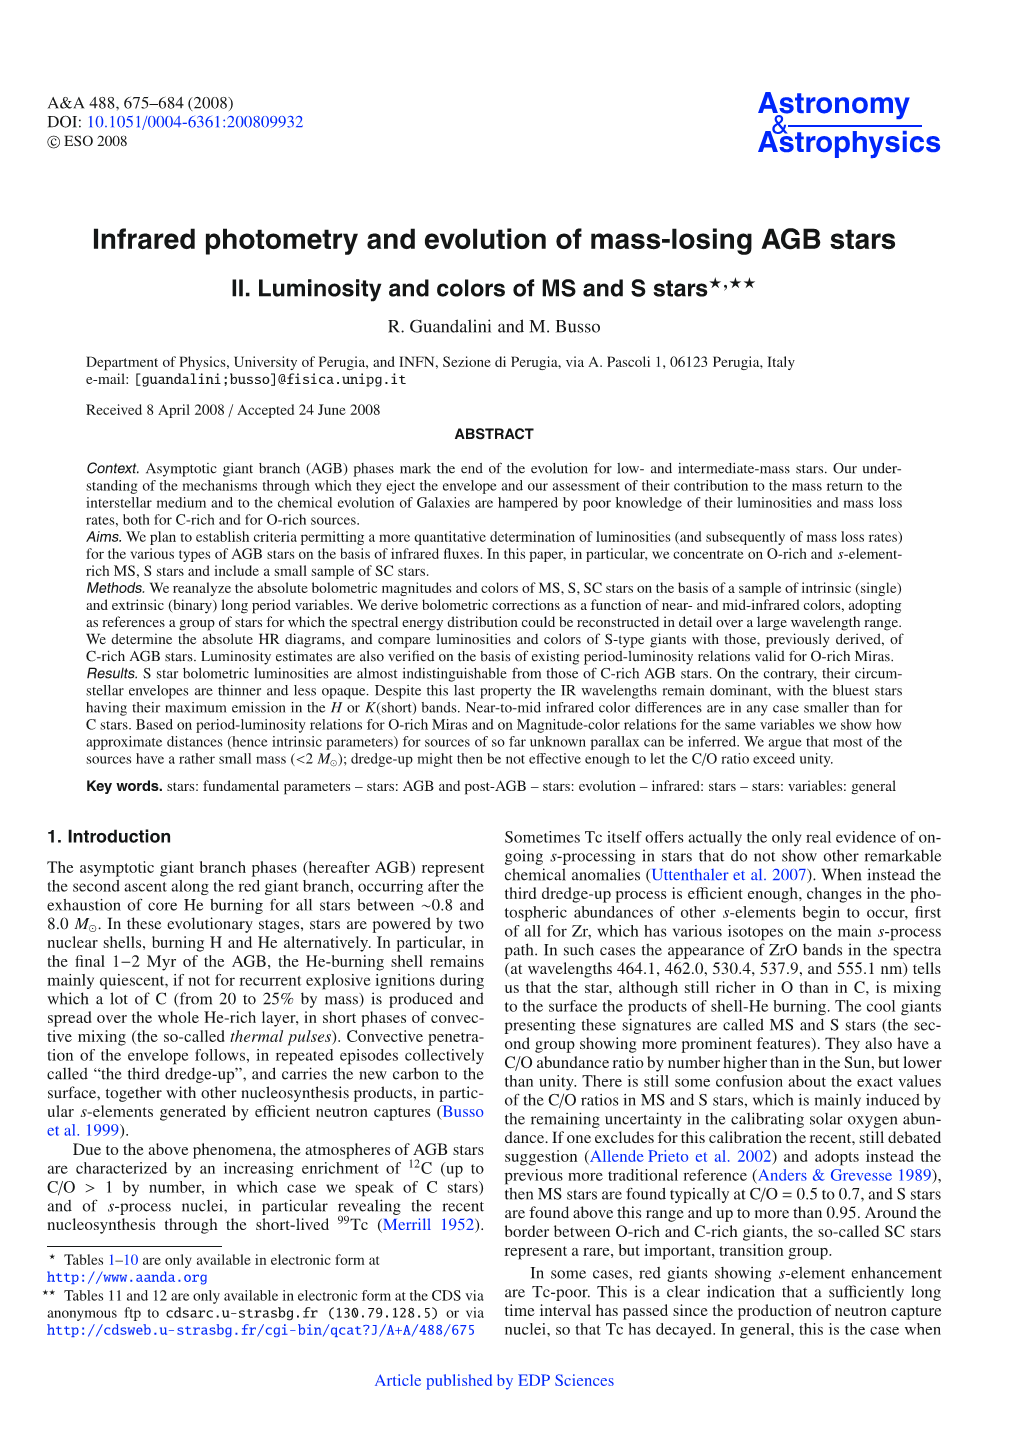 Infrared Photometry and Evolution of Mass-Losing AGB Stars II